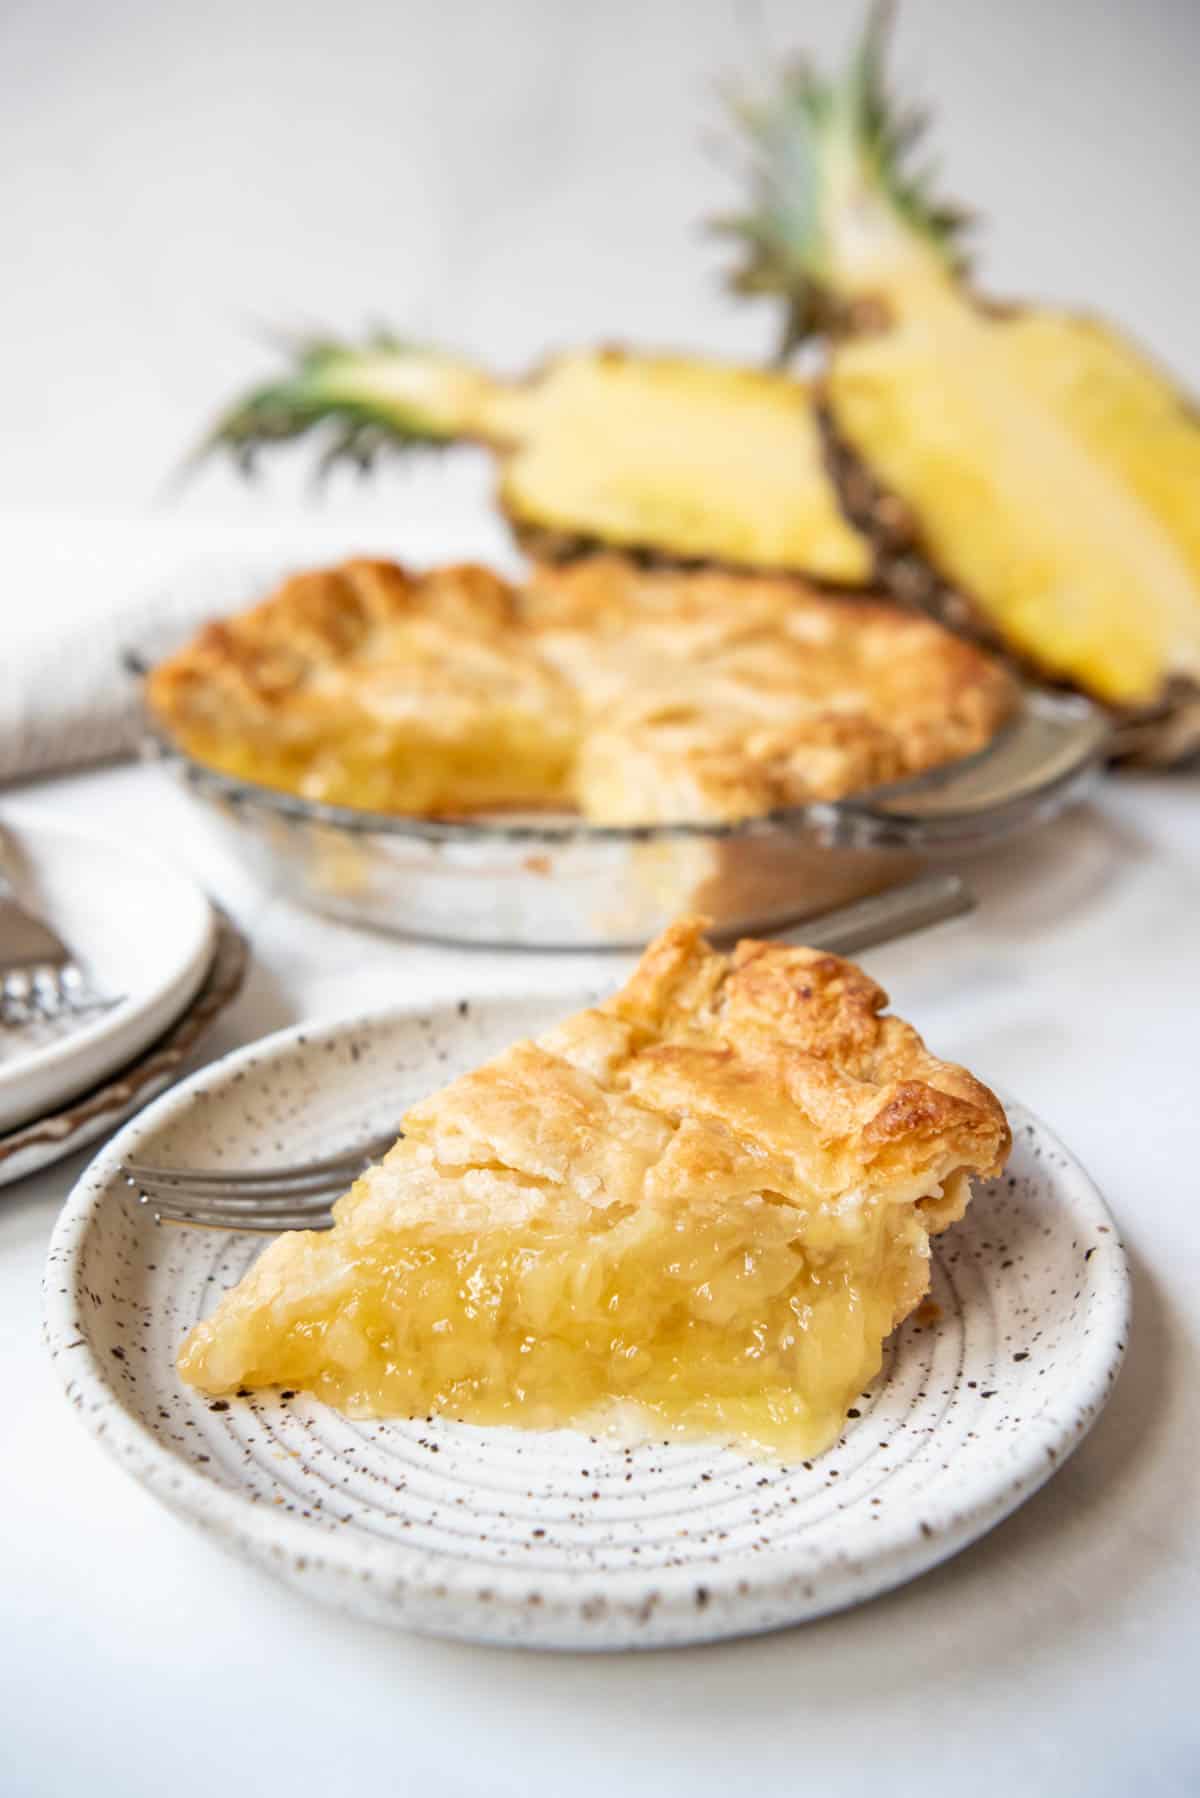 A slice of pineapple pie on a plate in front of the rest of the pie.